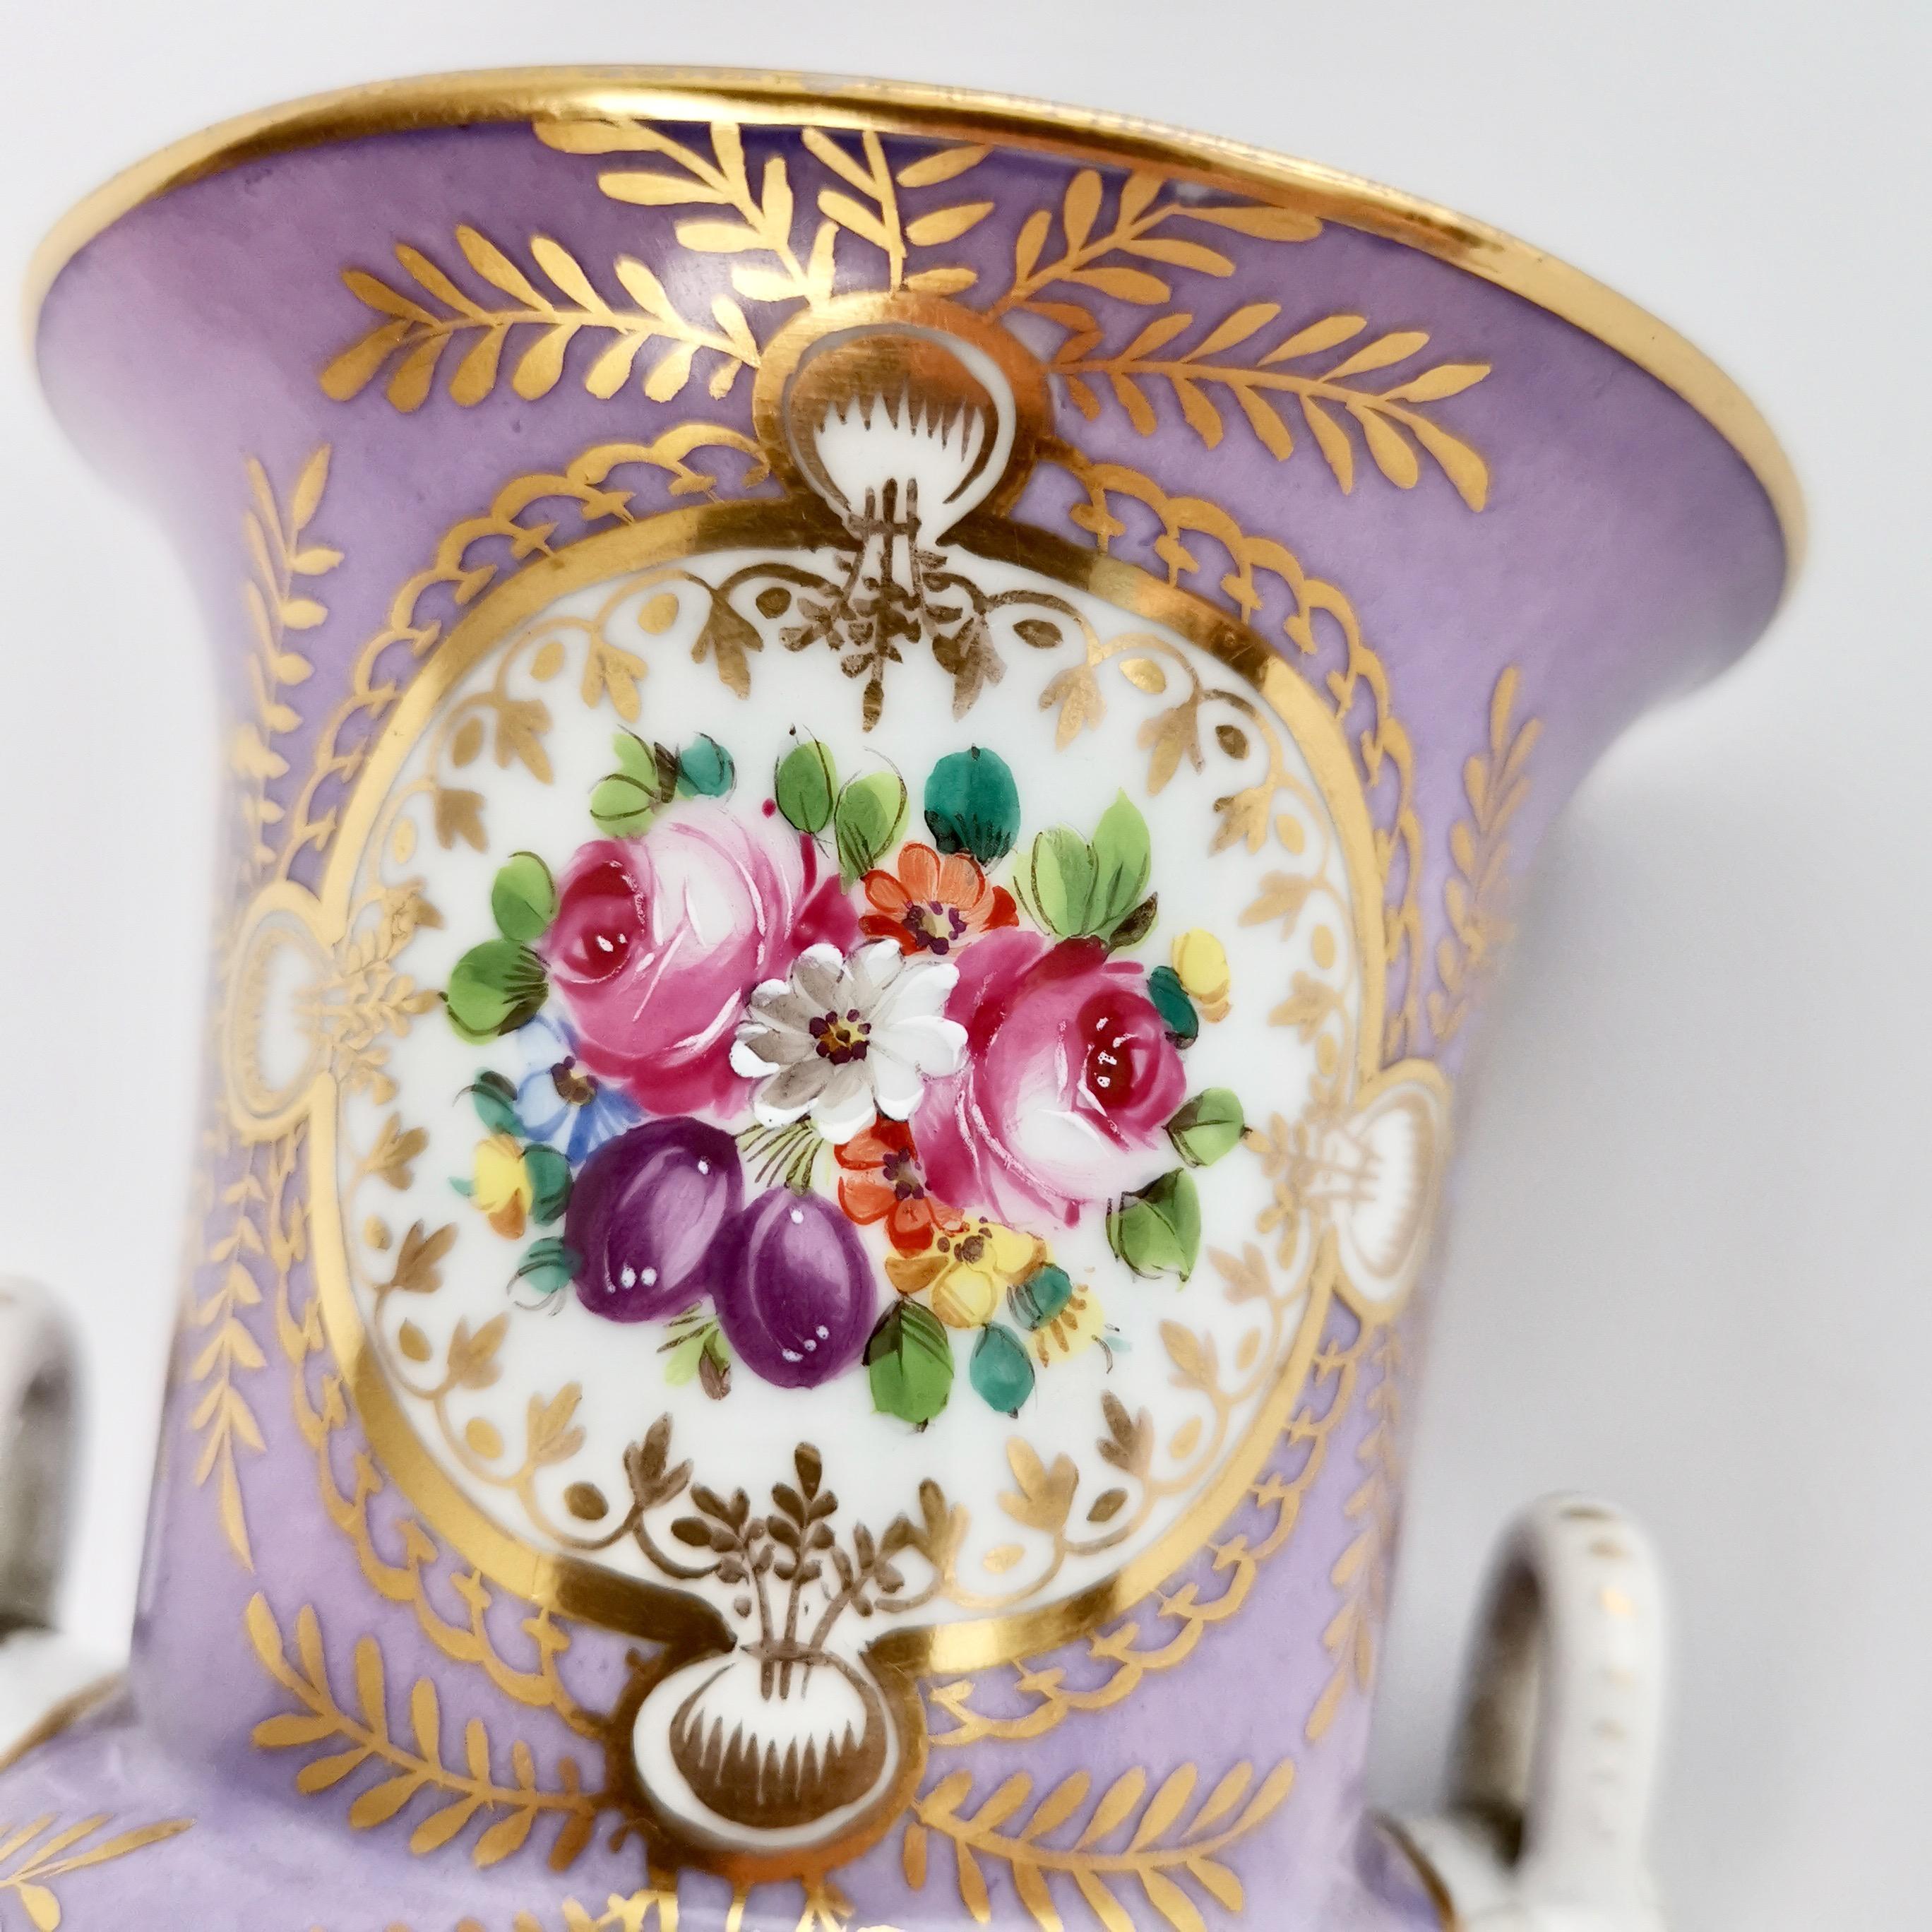 Hand-Painted Two Porcelain Campana Vases Attr. to Edmé Samson, Lilac, Birds, Flowers, 19th C